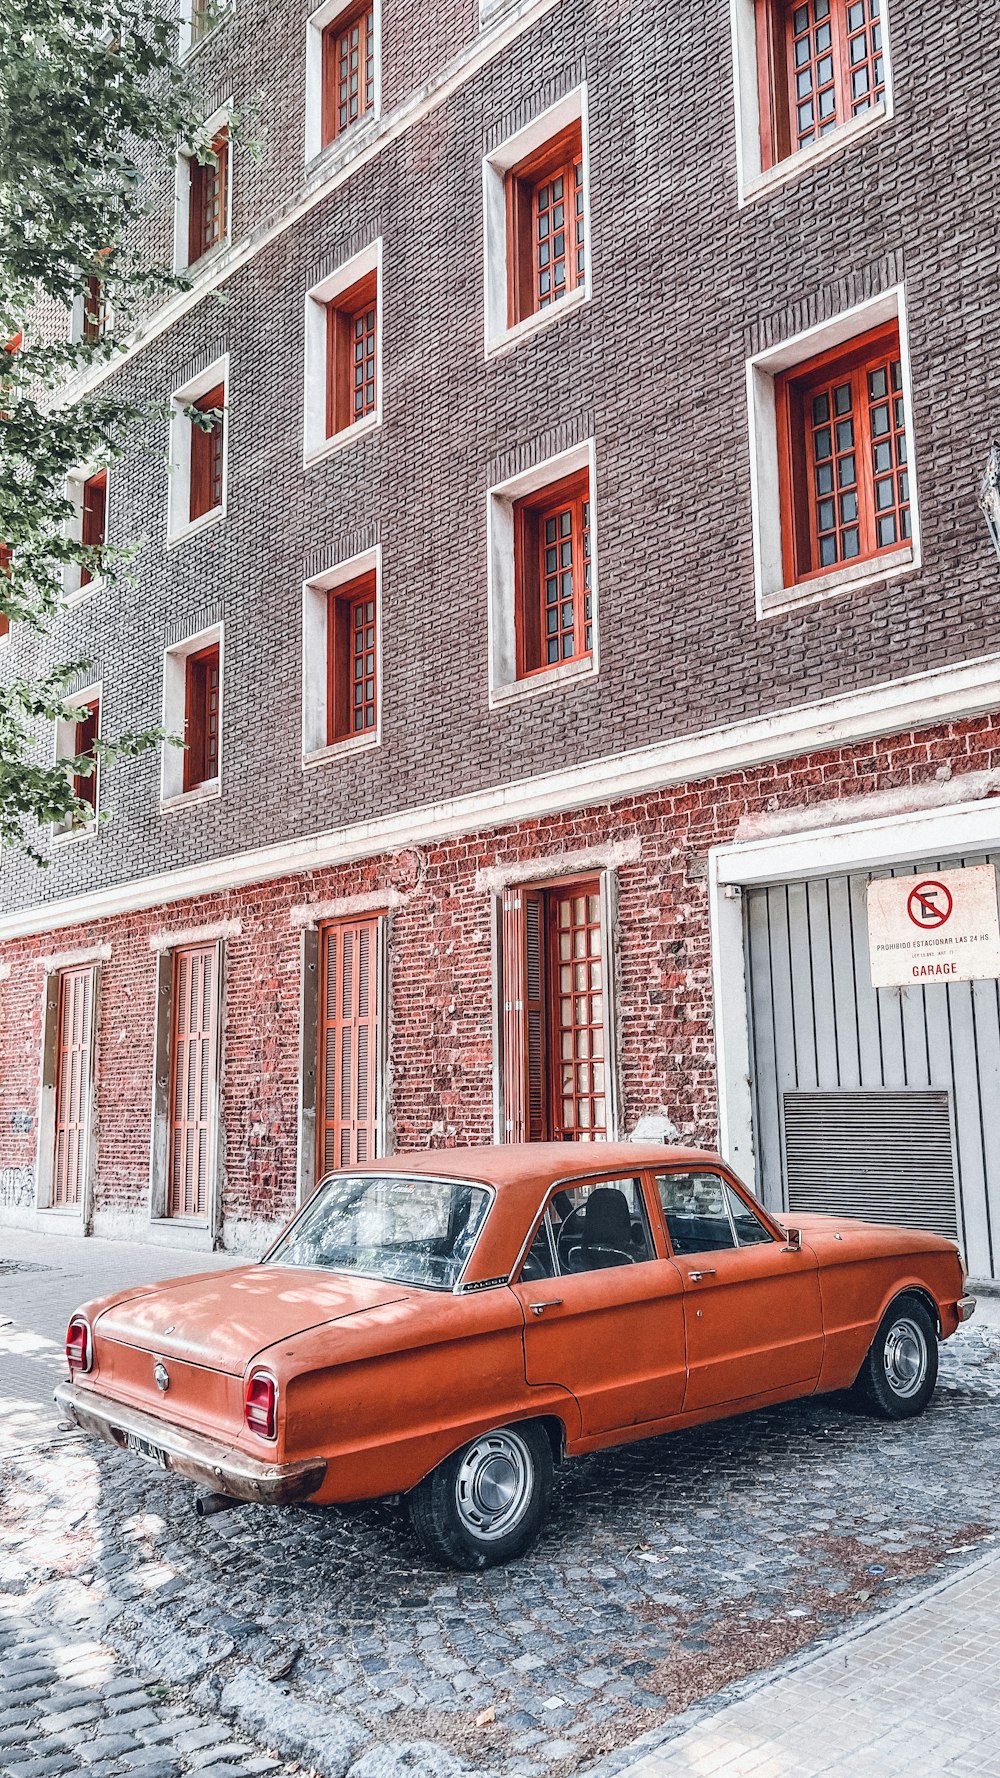 an orange car parked in front of a brick building